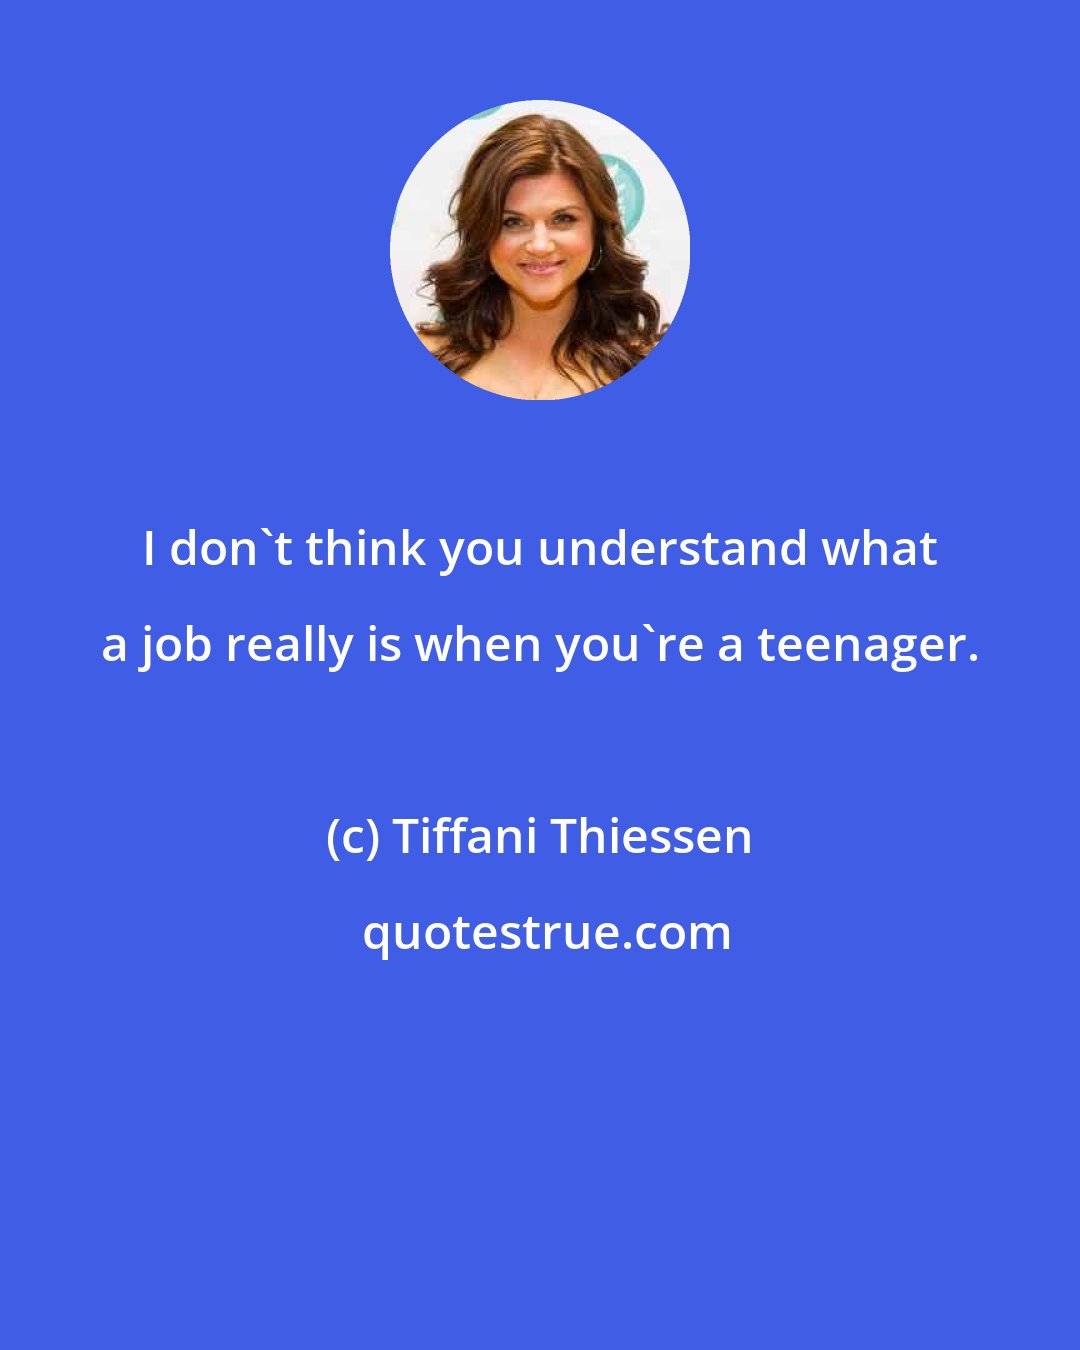 Tiffani Thiessen: I don't think you understand what a job really is when you're a teenager.